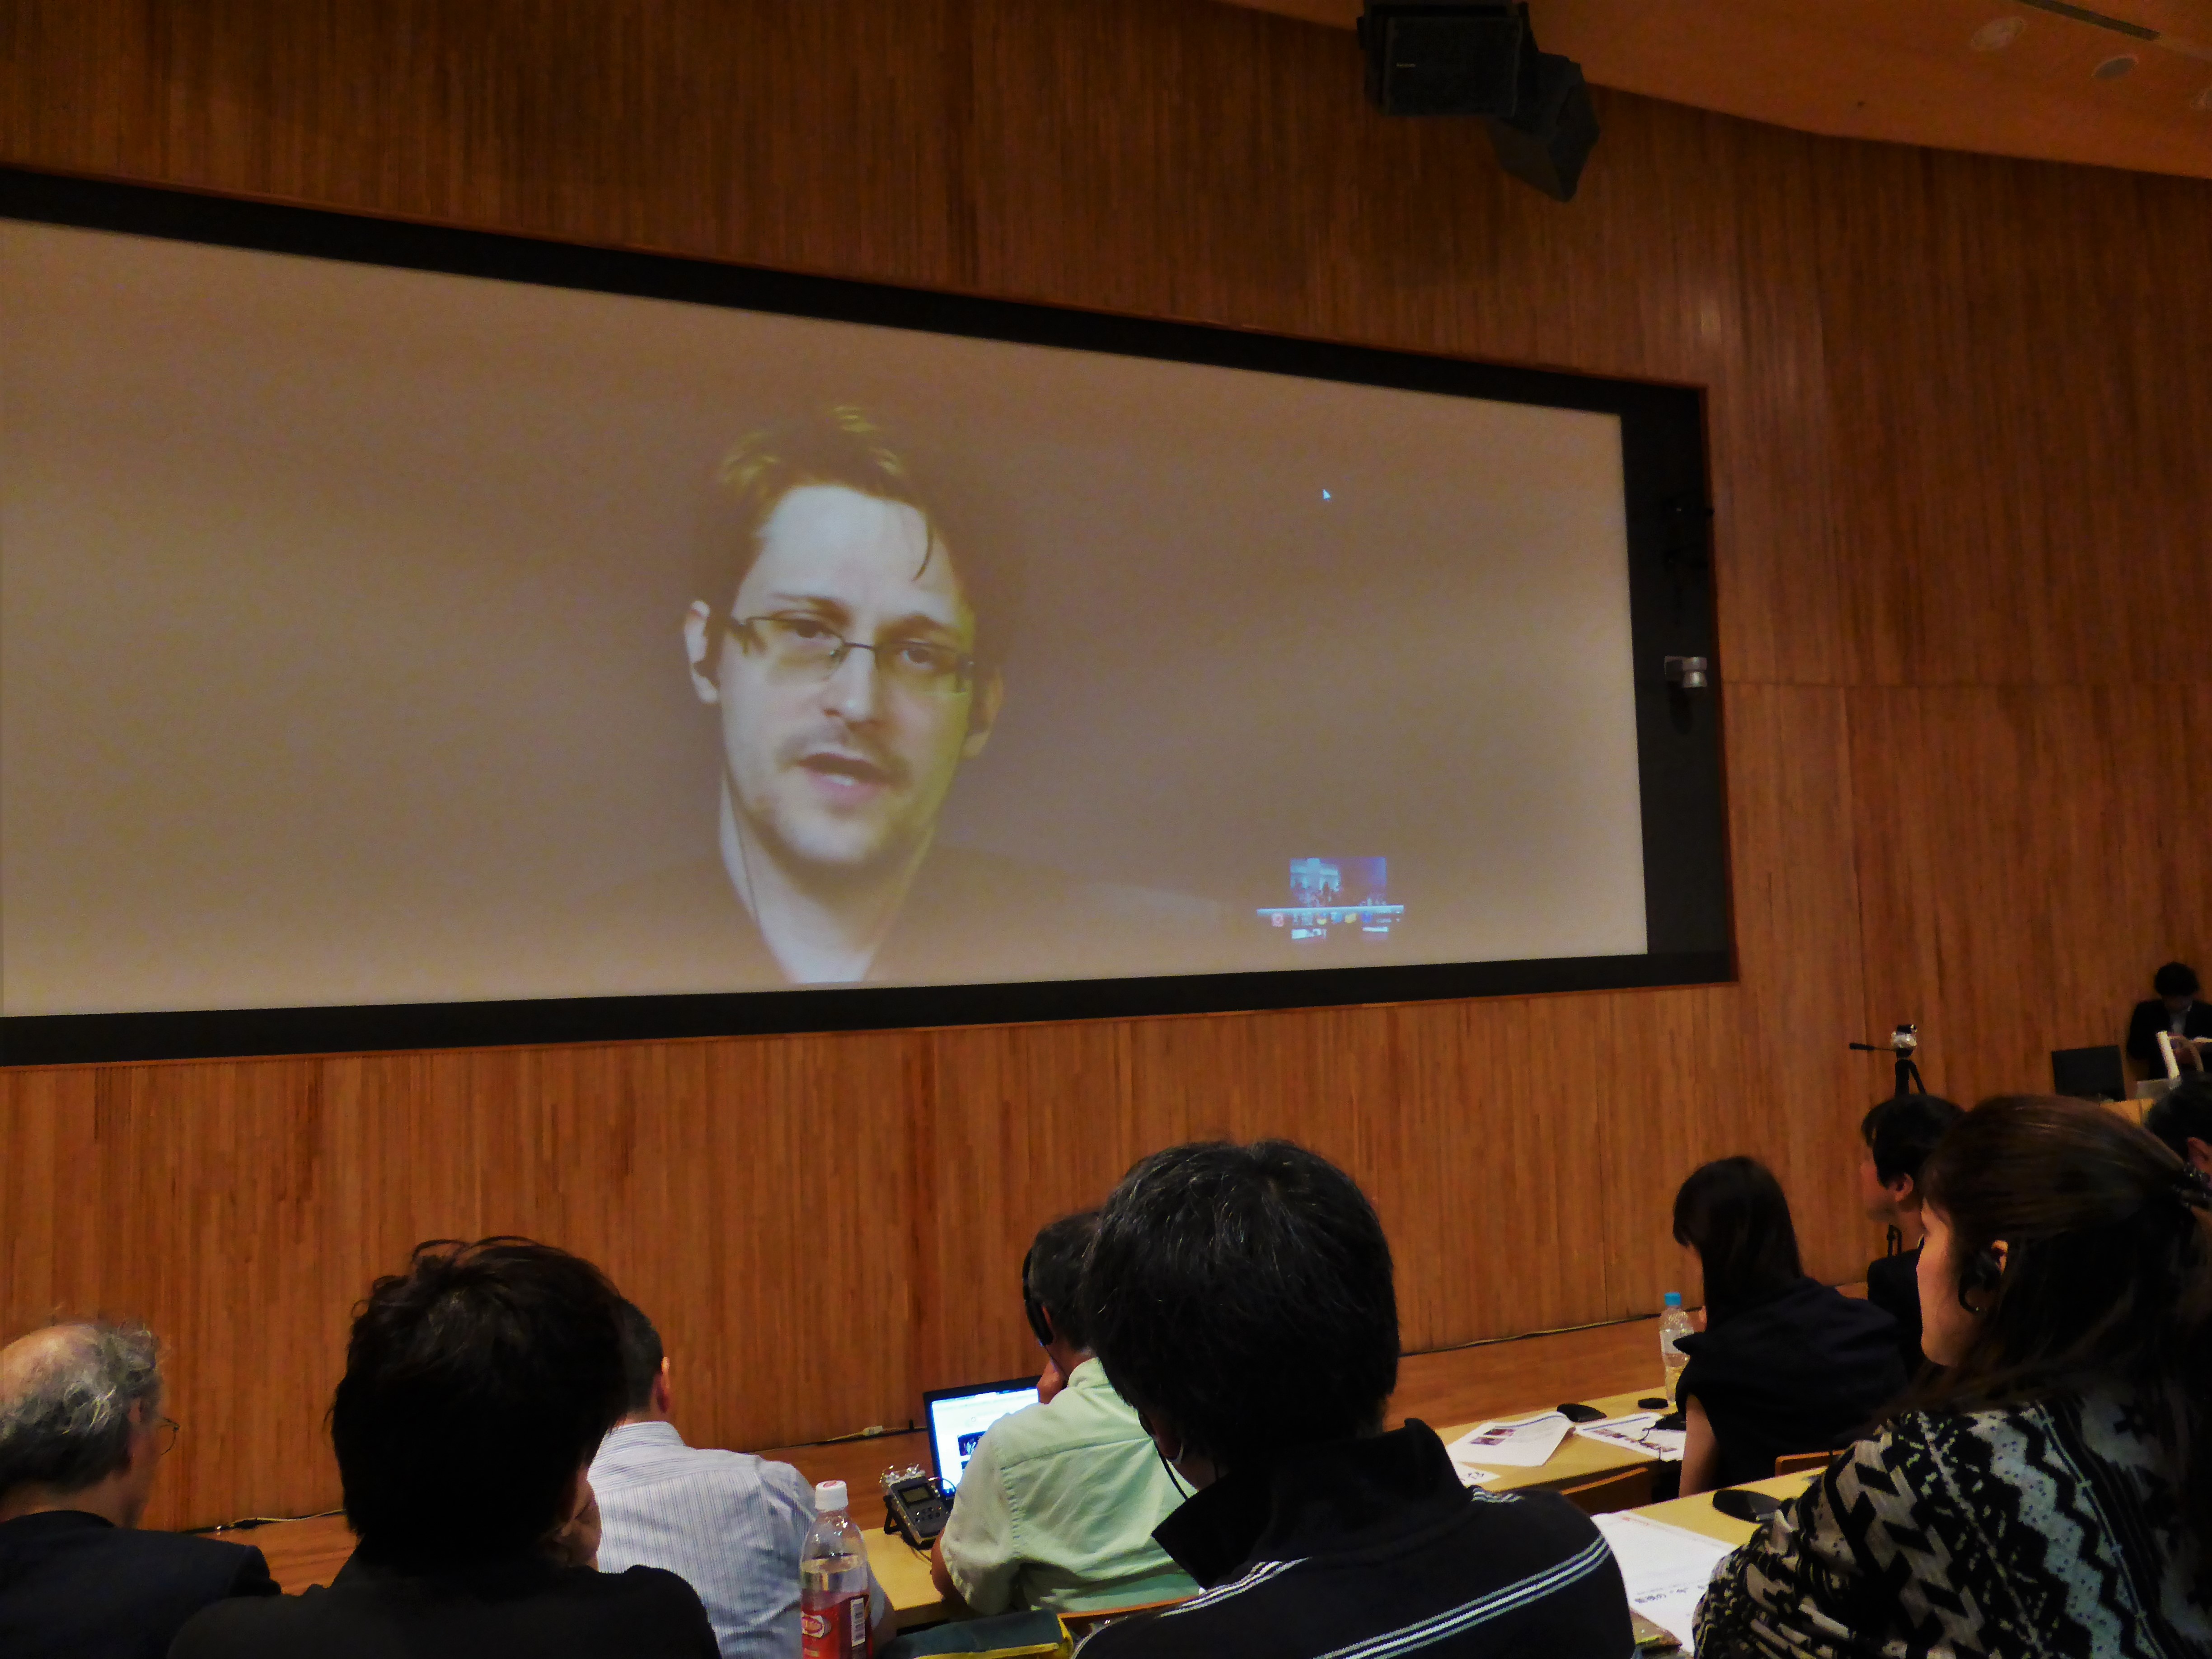 Edward Snowden, a former U.S. National Security Agency contractor who leaked secrets about the country's spying operations, speaks about U.S. surveillance activities in Japan via a video conference from Russia during a symposium in Tokyo on Saturday. | SHUSUKE MURAI